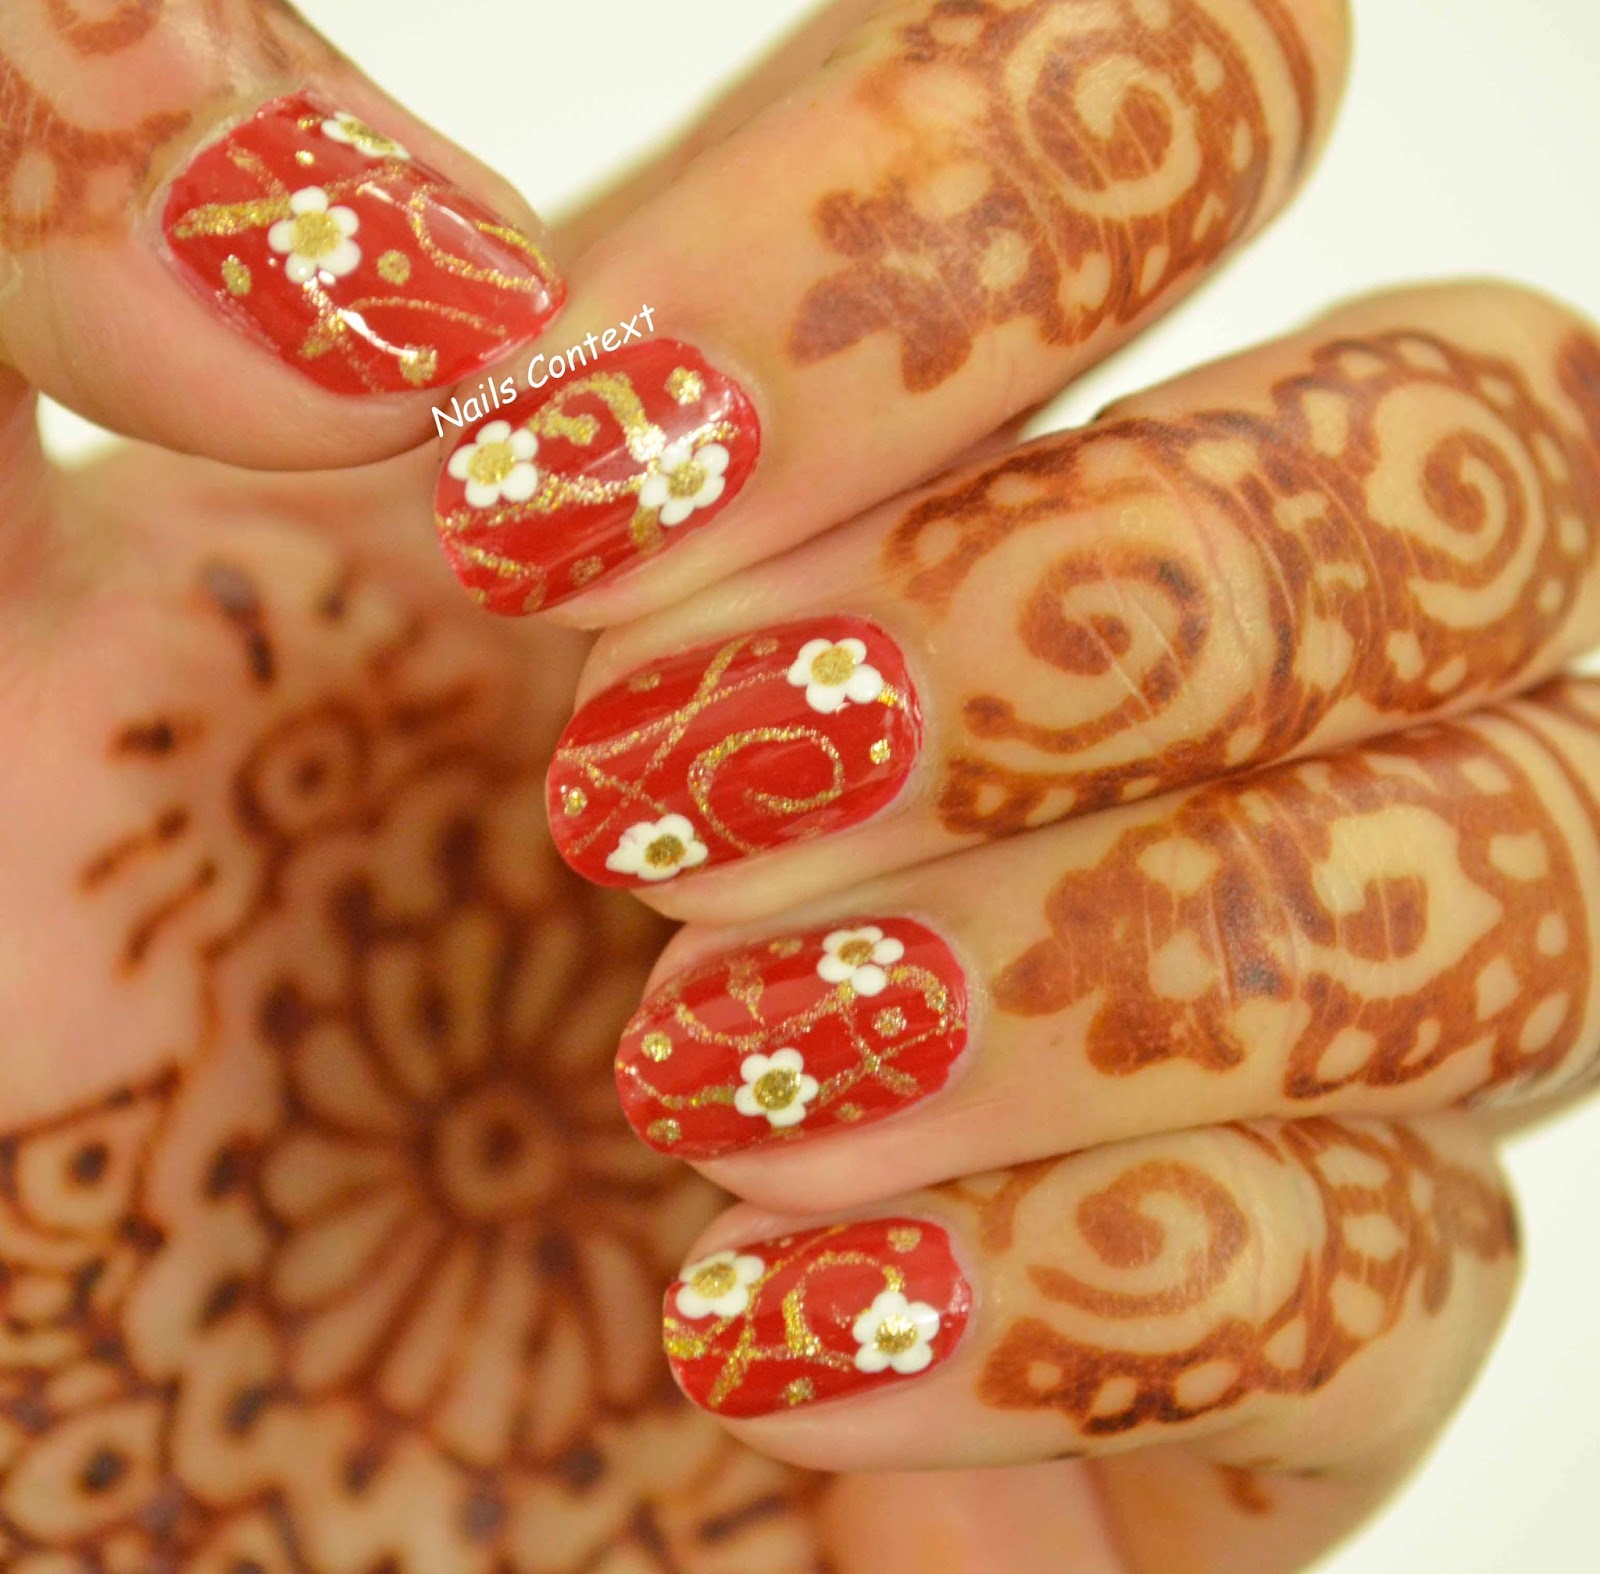 Manicure Tips For Brides: How to Prep Nails Before Wedding in Easy Steps -  Shahnaz Husain Speaks!